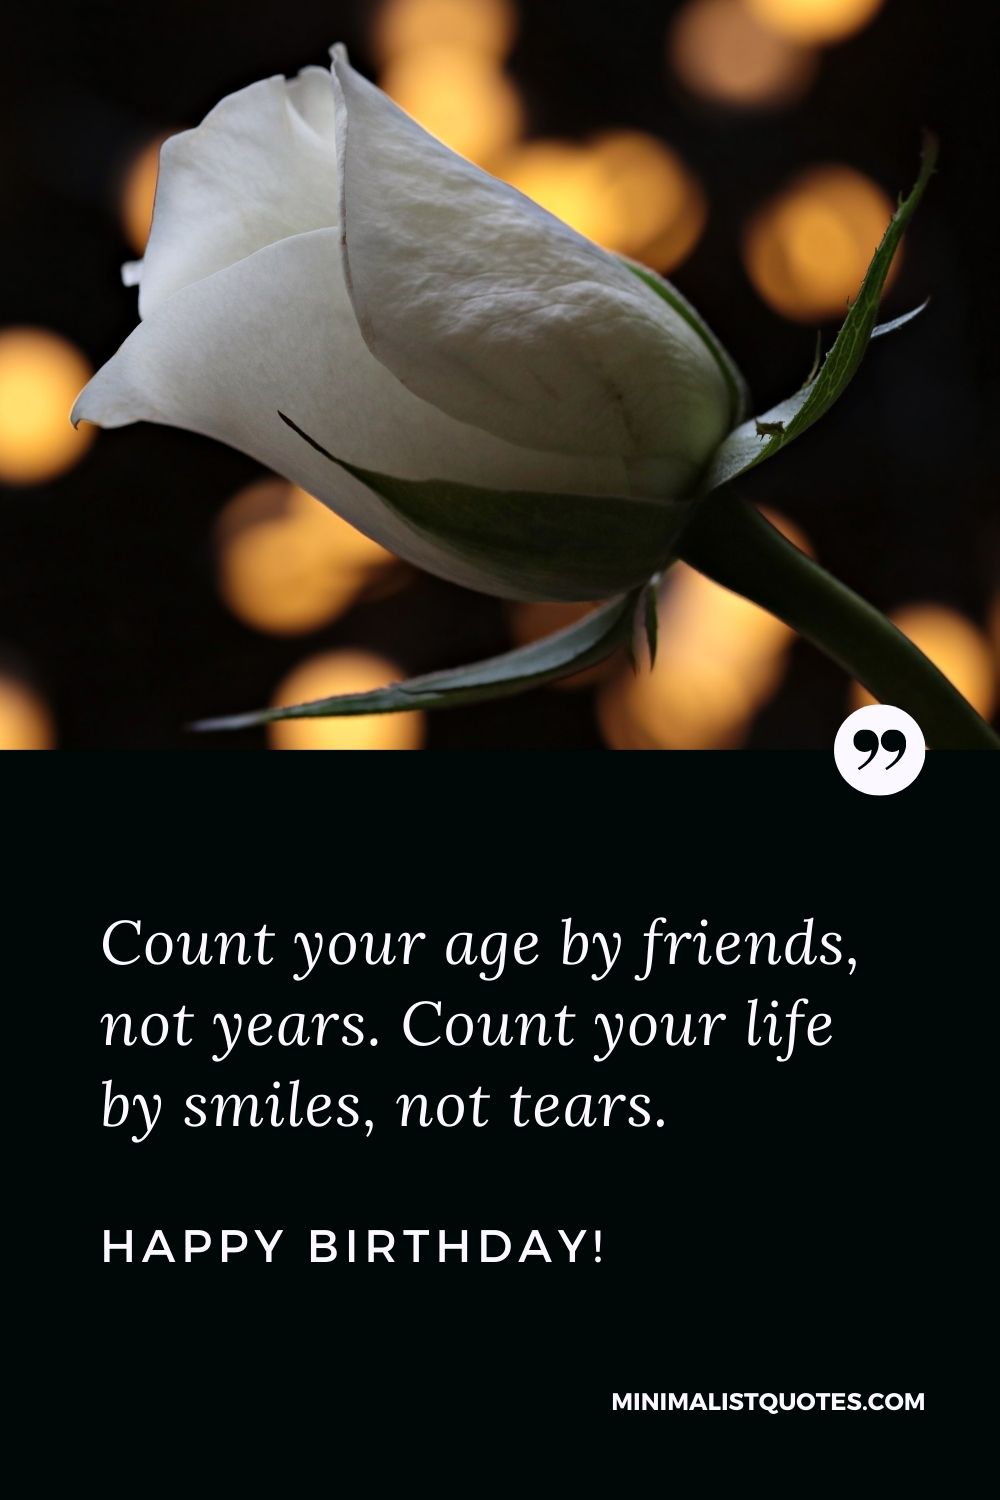 Happy birthday dear friend quote: Count your age by friends, not years. Count your life by smiles, not tears. Happy Birthday!